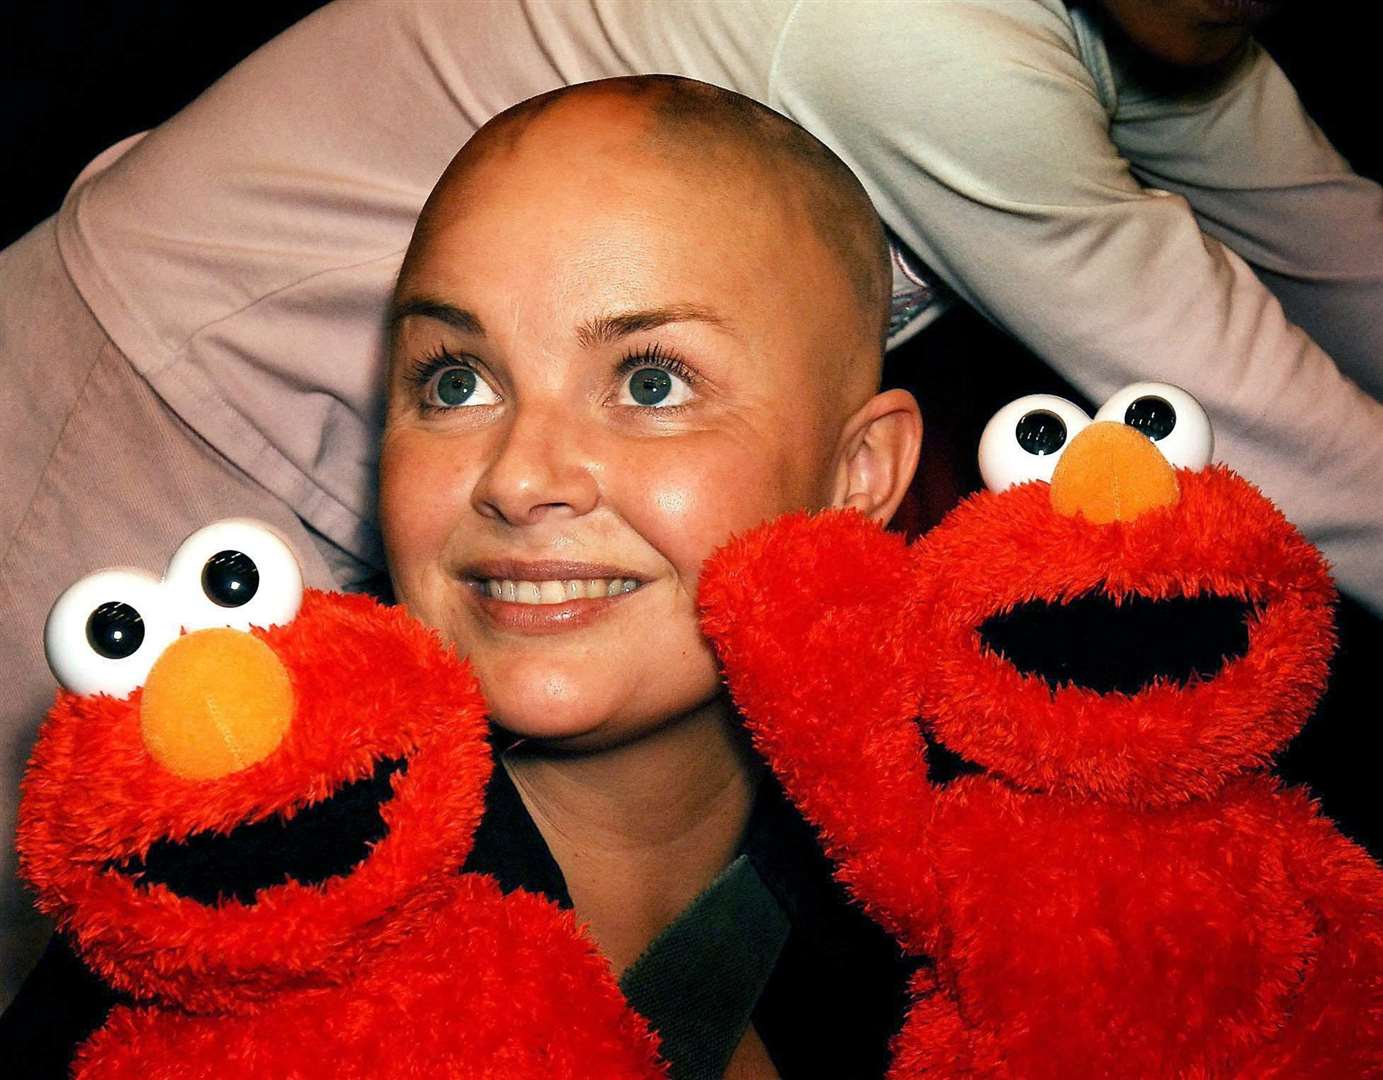 Broadcaster Gail Porter poses with TMX Elmo toy at Hamleys in 2005 (John Stillwell/PA Wire)